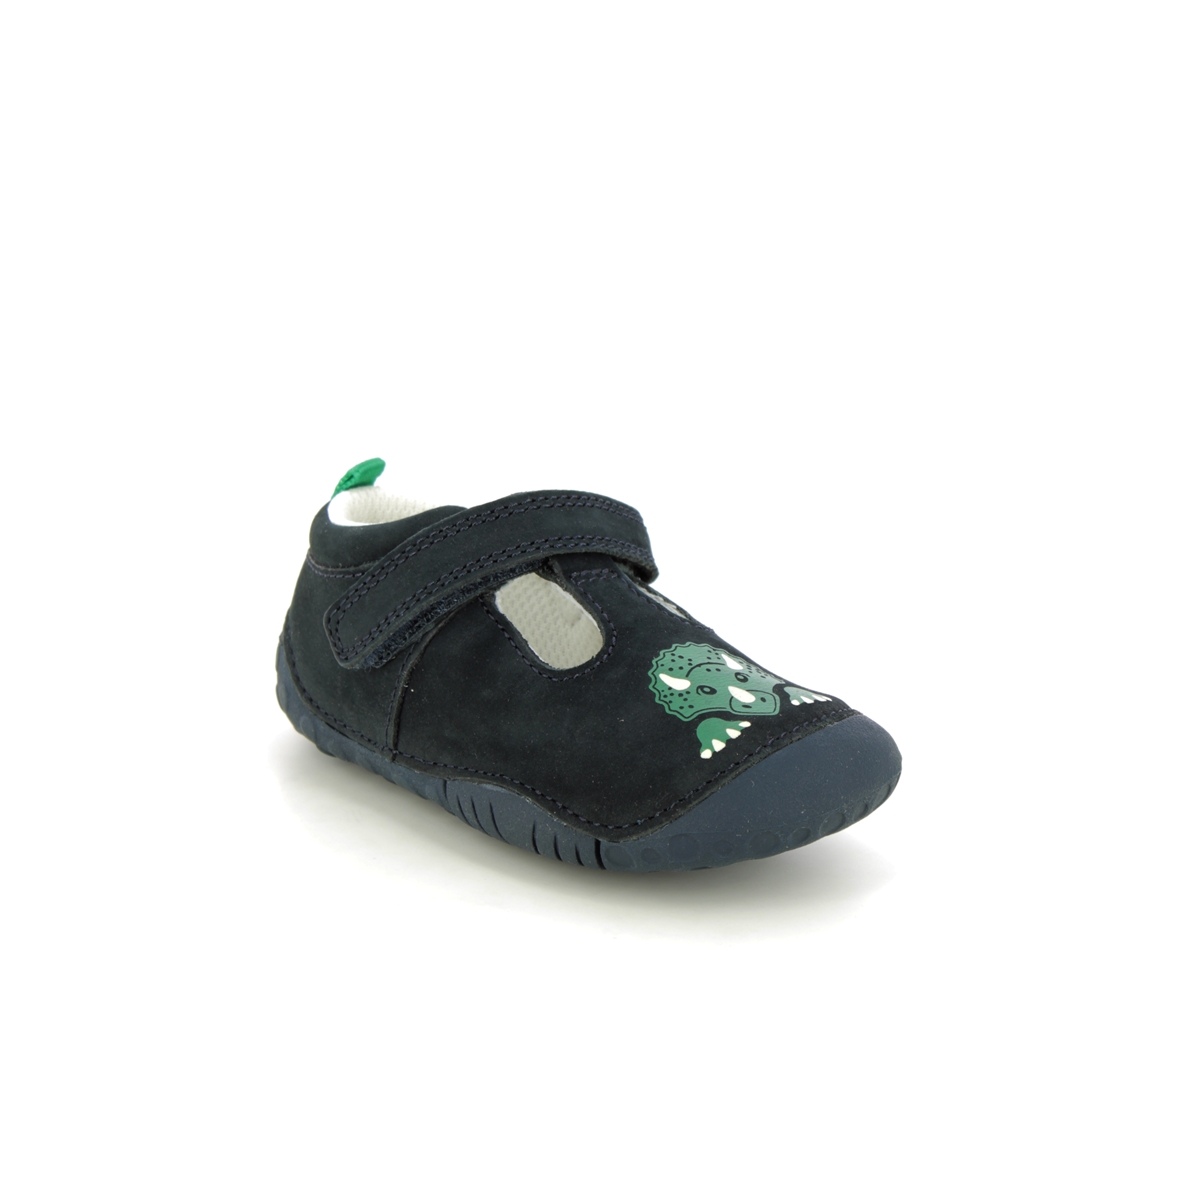 Start Rite Stomper T Bar Navy Nubuck Kids Boys First Shoes 0785-97G in a Plain Leather in Size 4